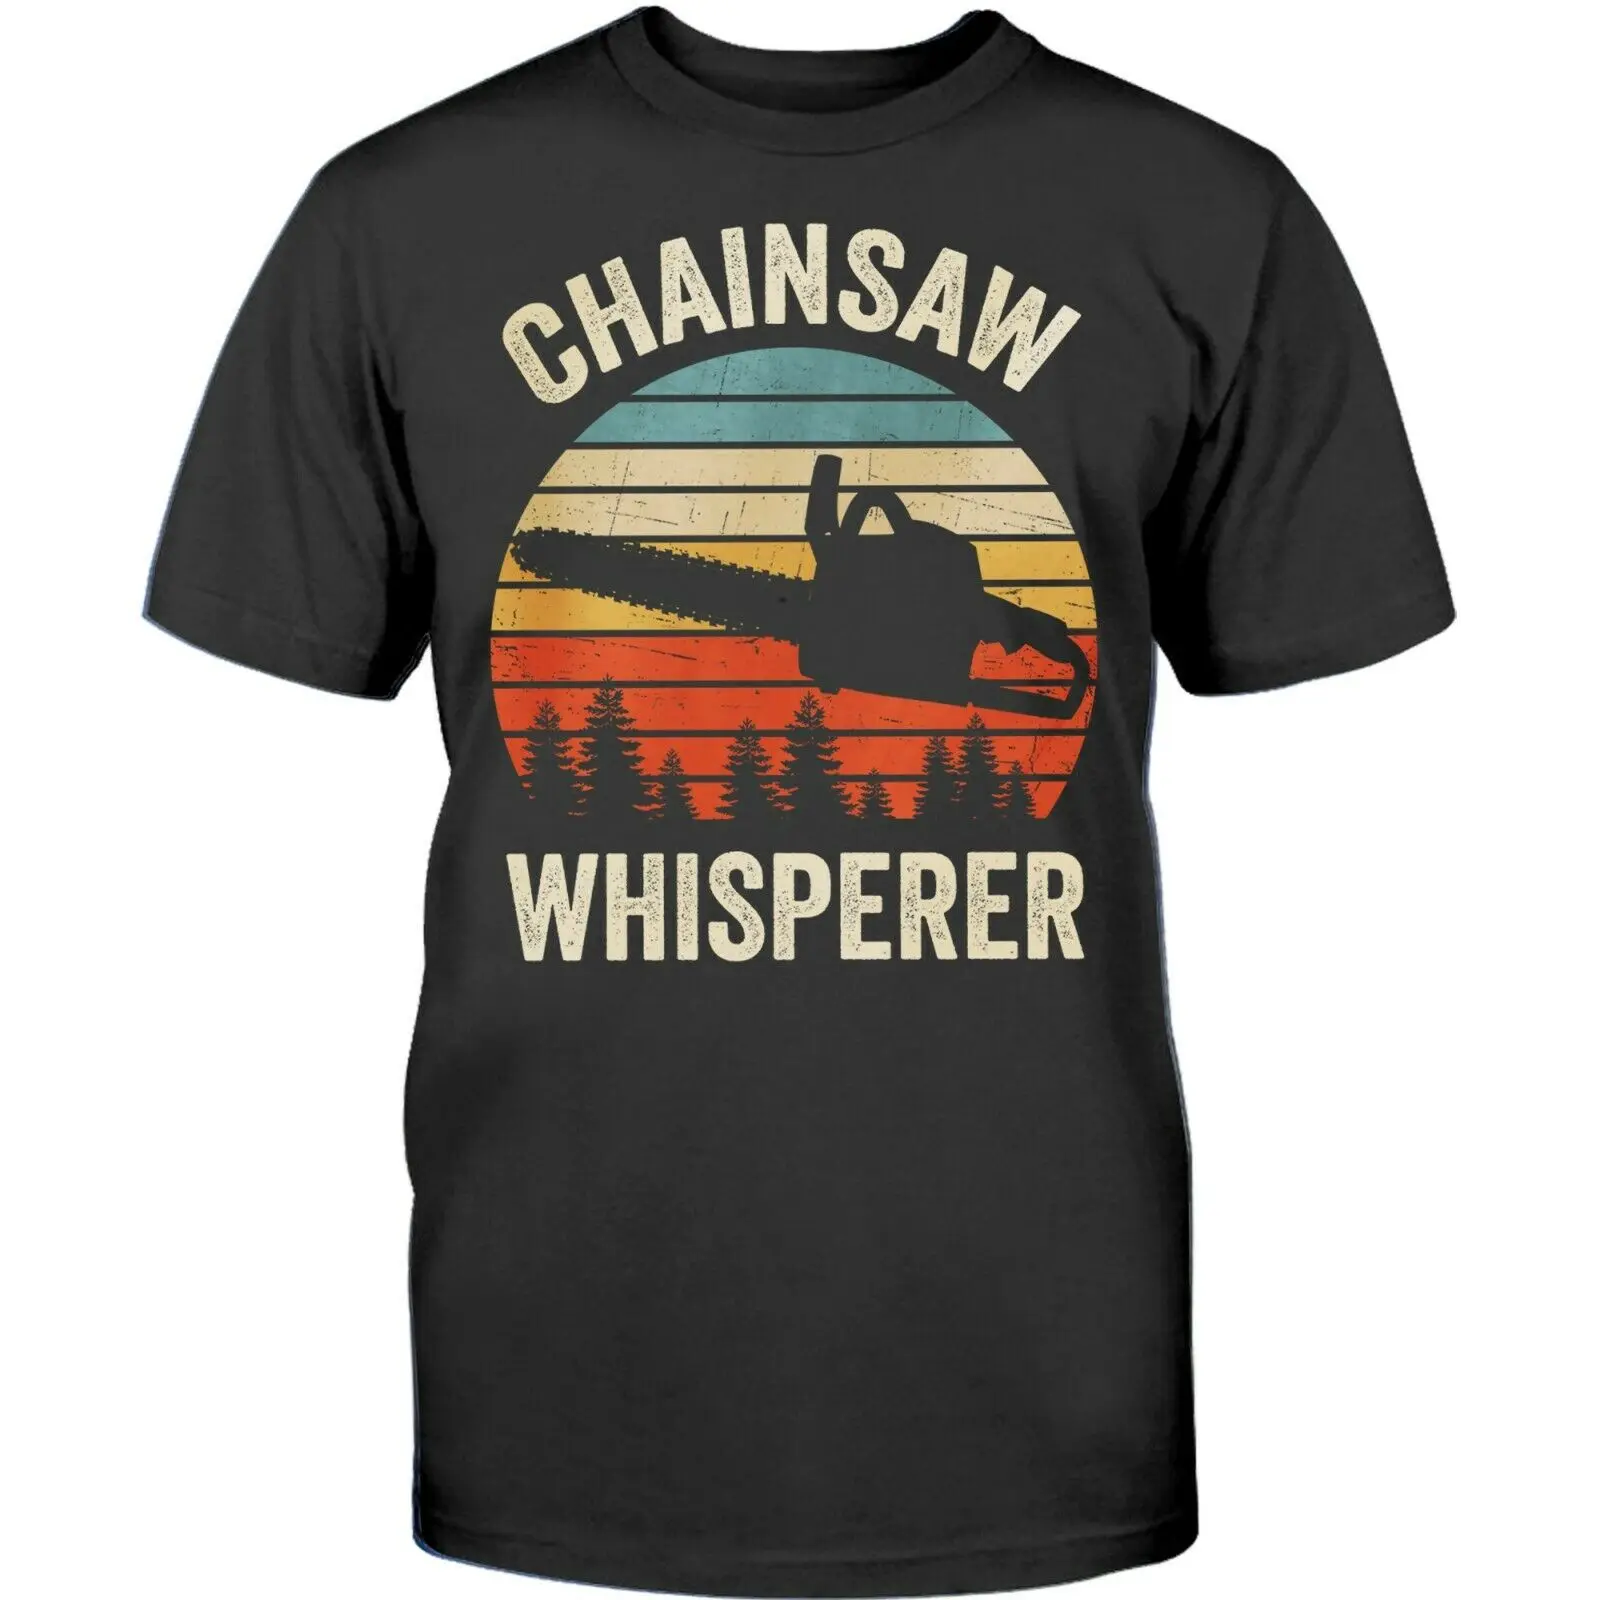 Funny Arborist Chainsaw Whisperer Tree Trimmer Logger T-Shirt 100% Cotton O-Neck Short Sleeve Casual Mens T-shirt Size S-3XL